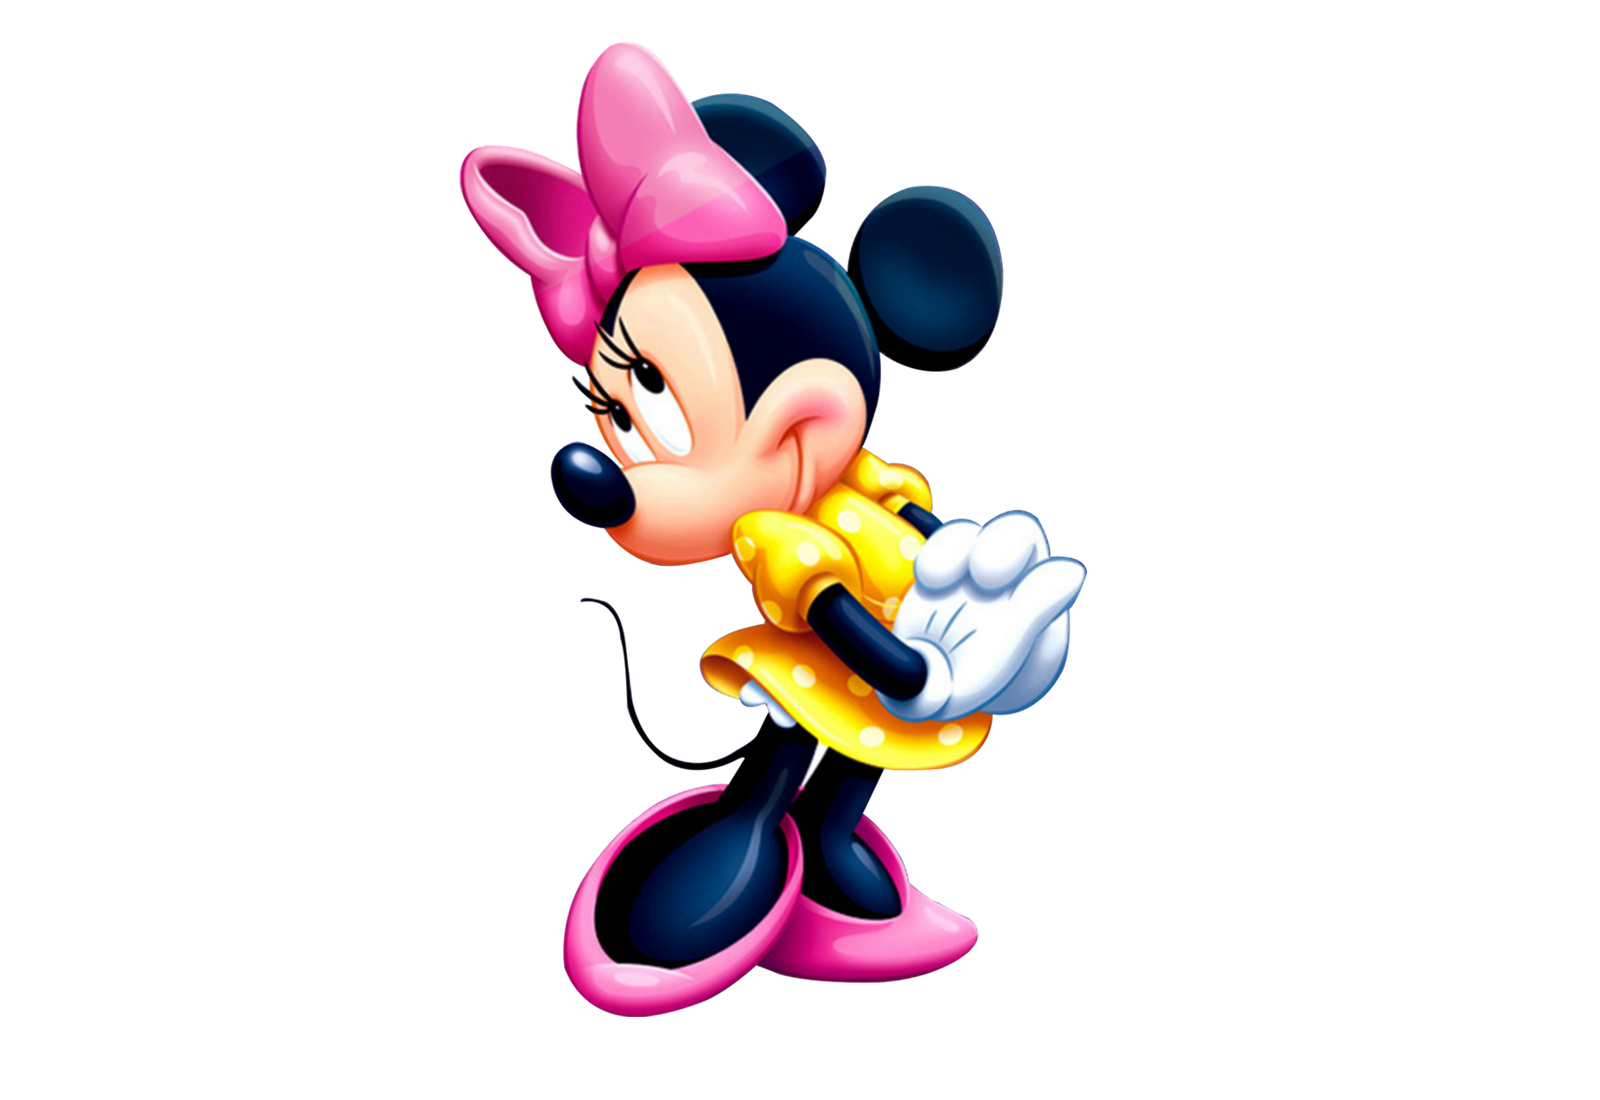 Download Minnie Mouse Transparent Background HQ PNG Image in different